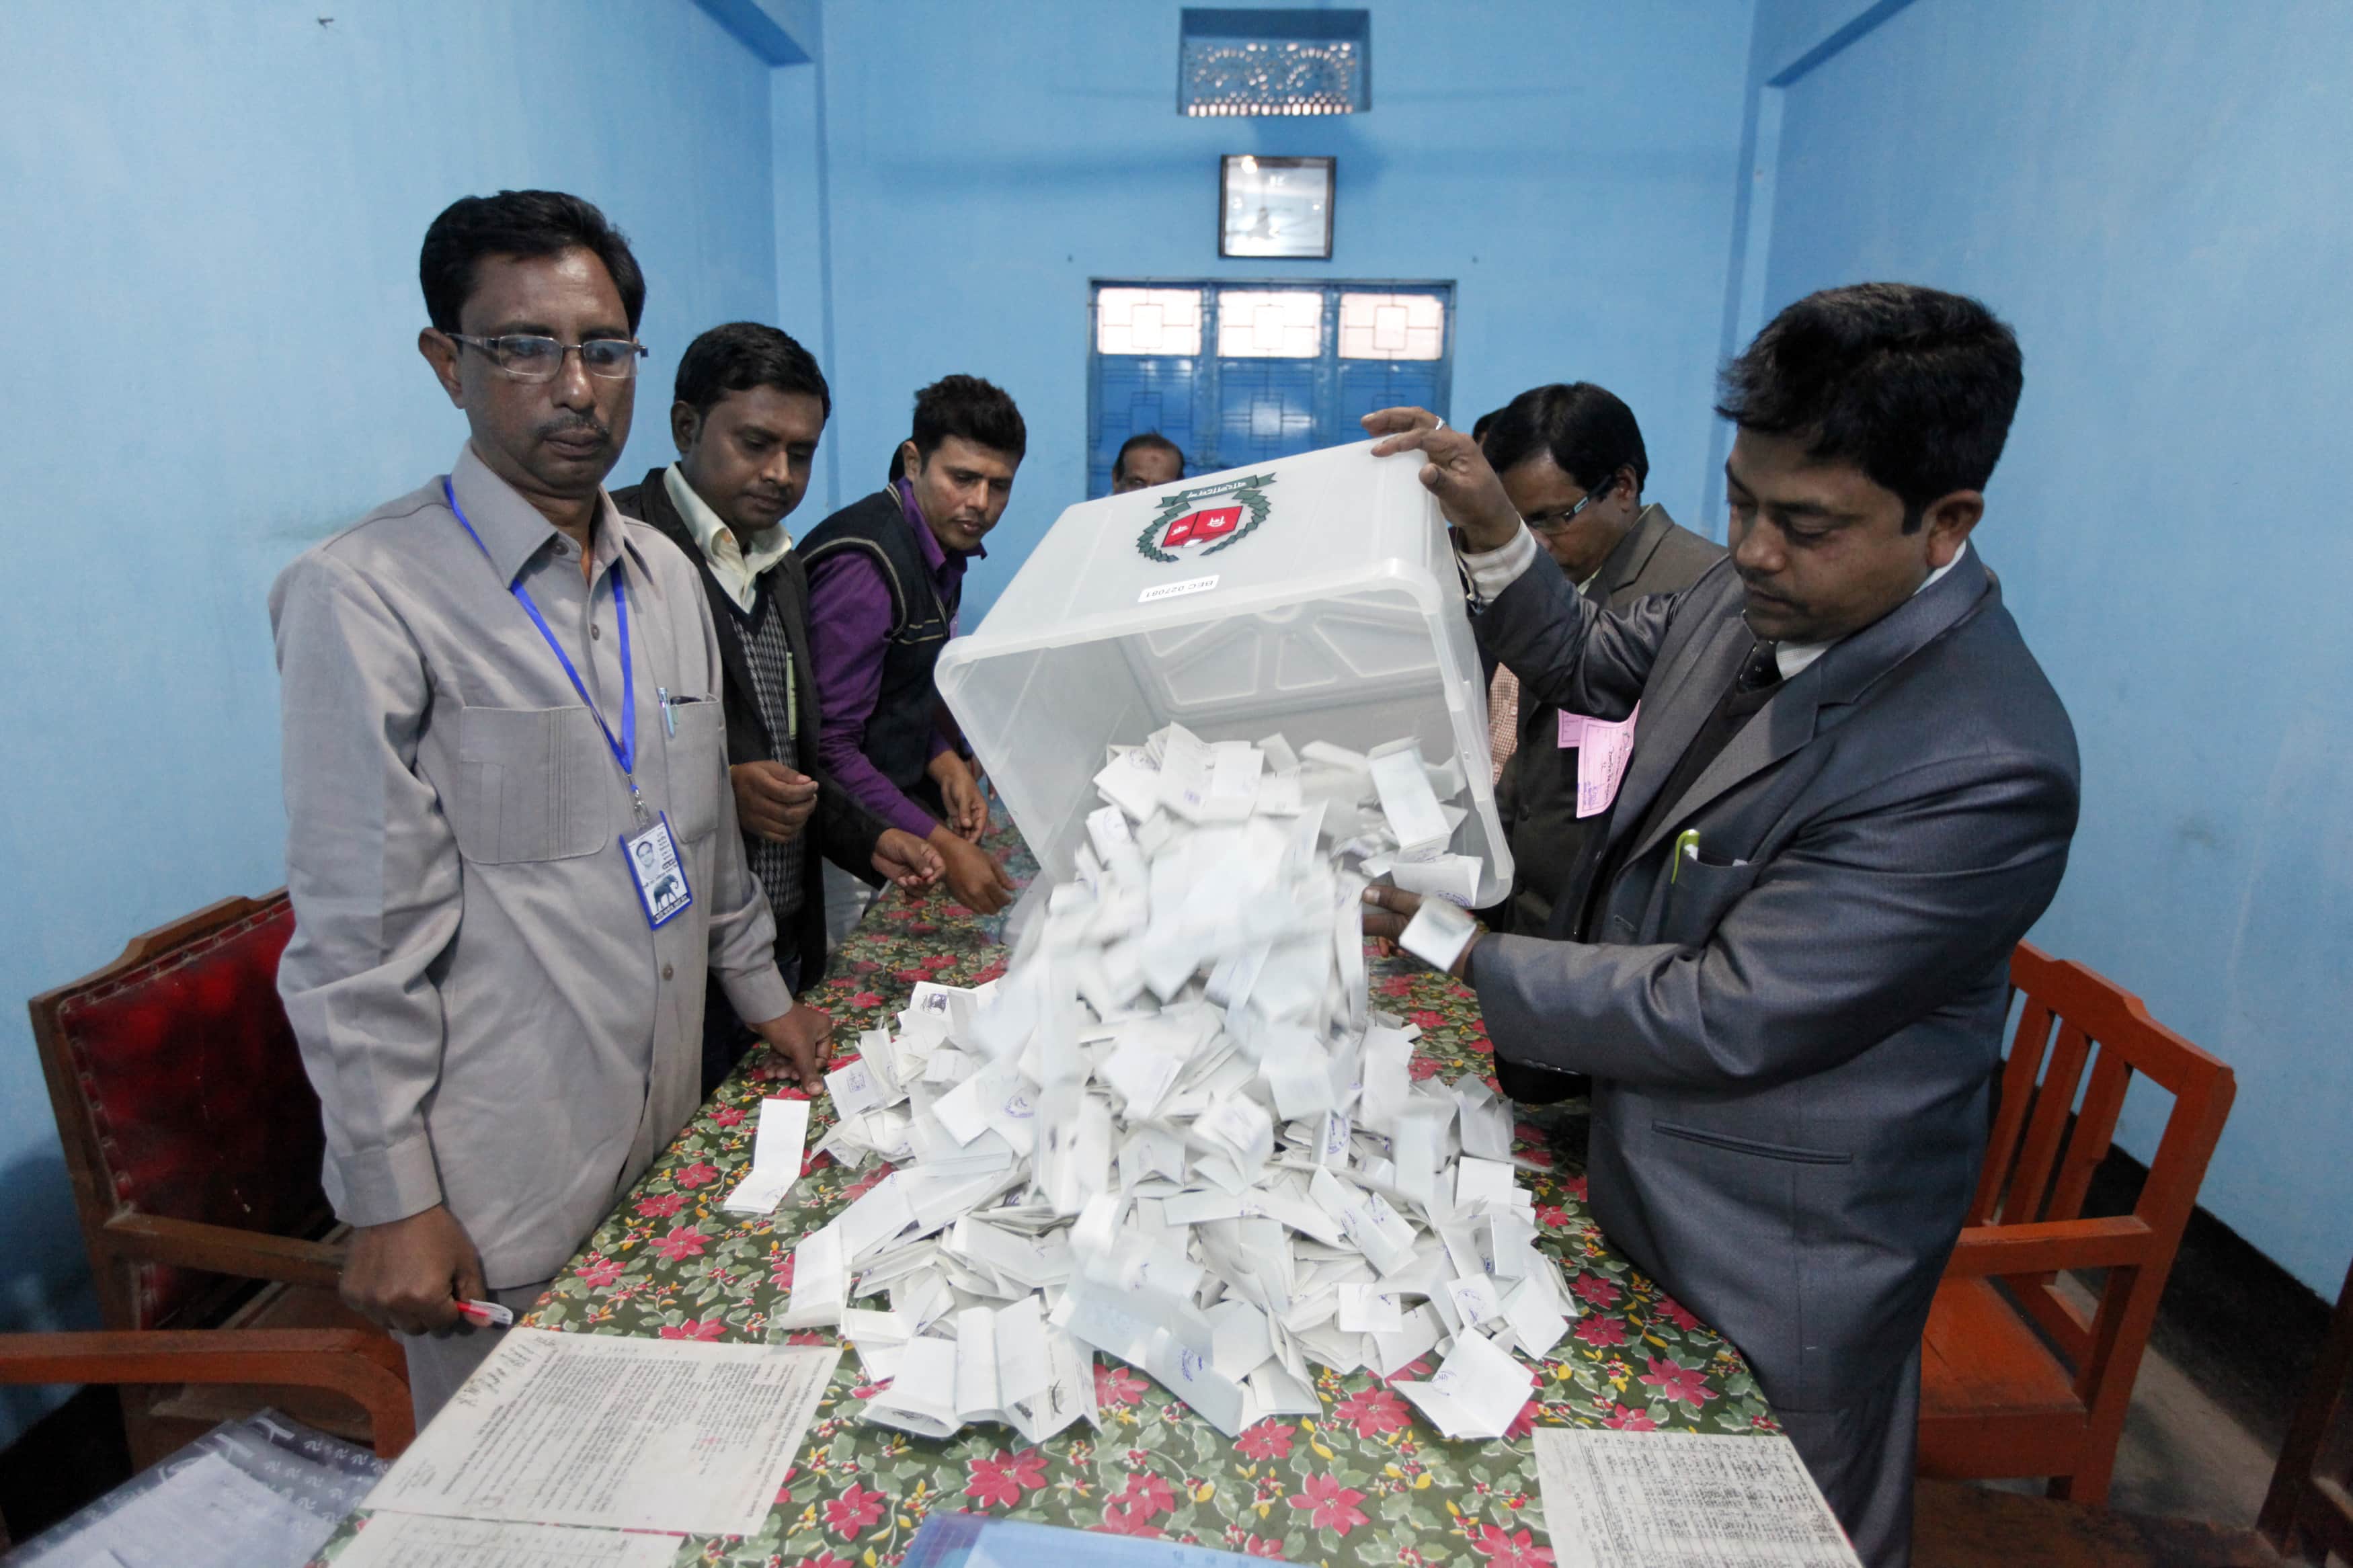 A polling officer pours ballot papers onto a table to be counted during parliamentary elections in Dhaka, 5 January 2014, REUTERS/Andrew Biraj